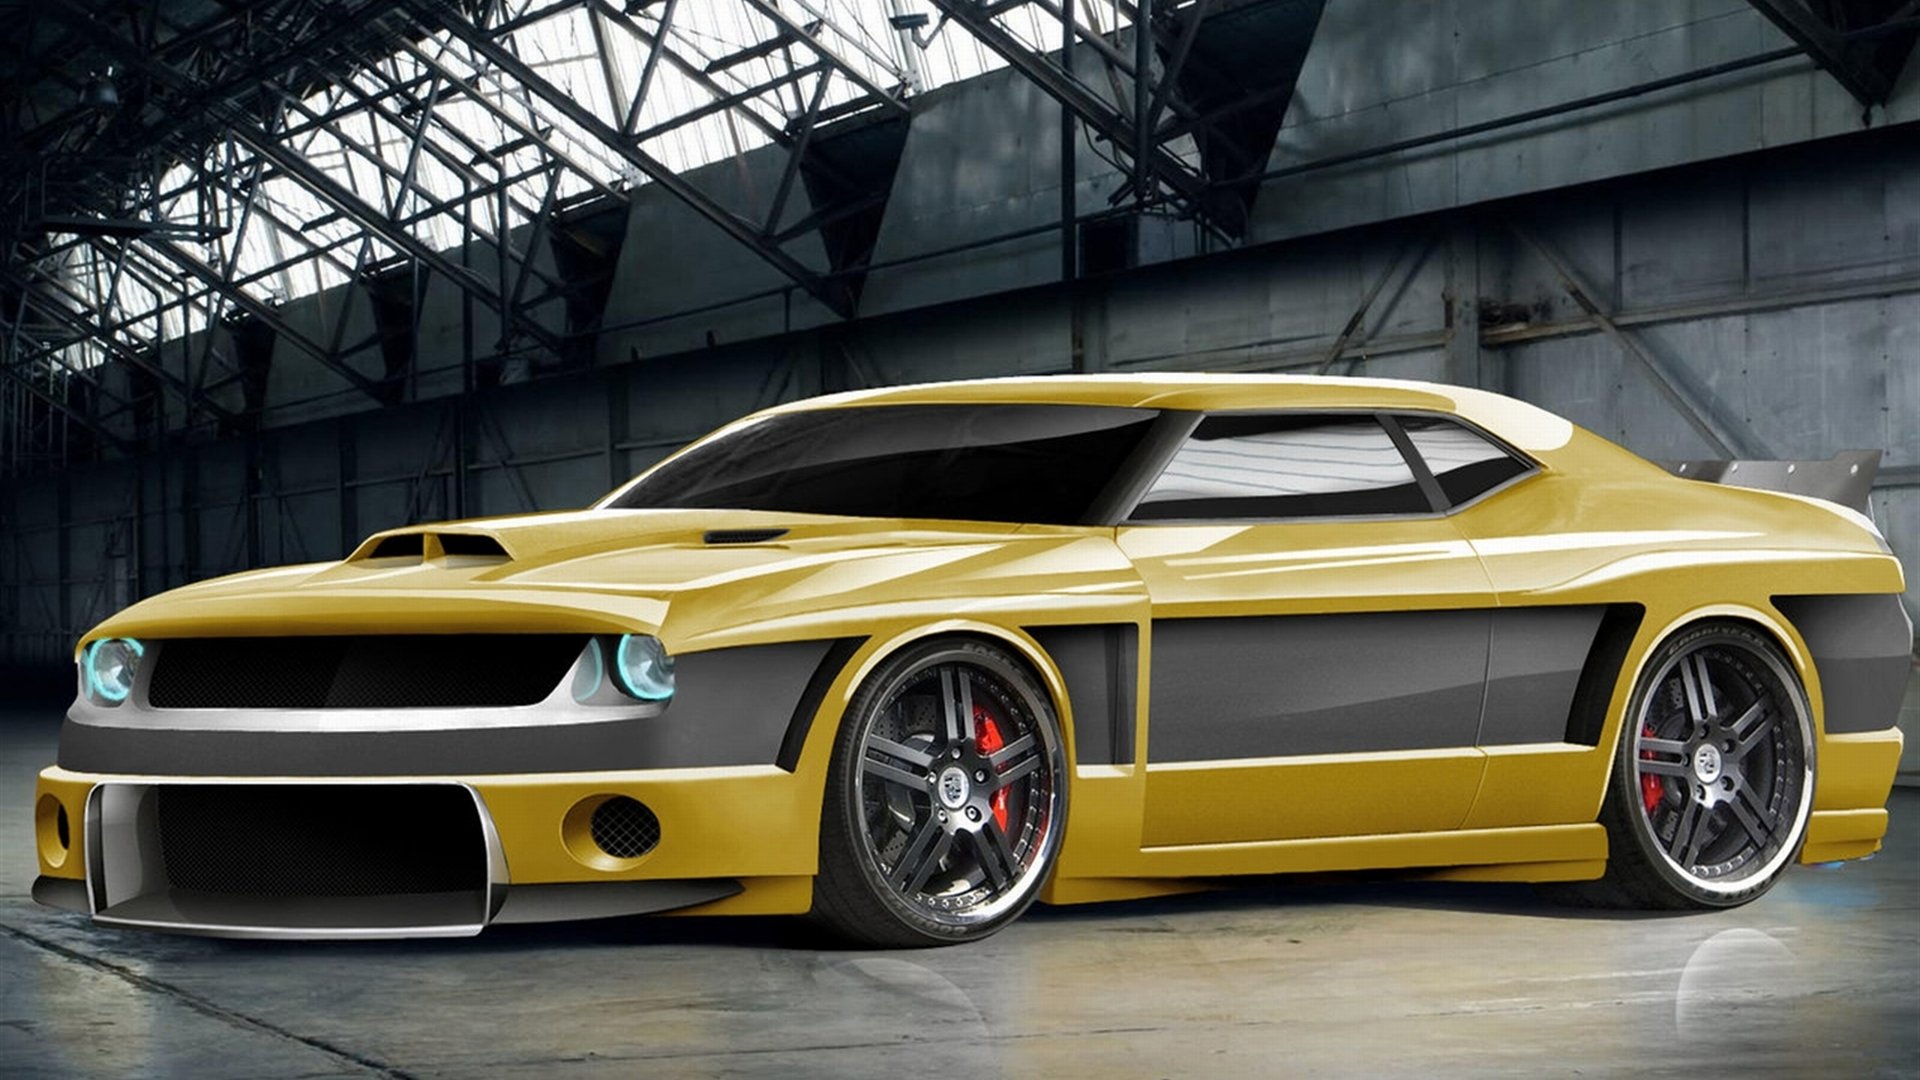 Dodge Full HD Wallpaper and Background Image | 1920x1080 | ID:146825